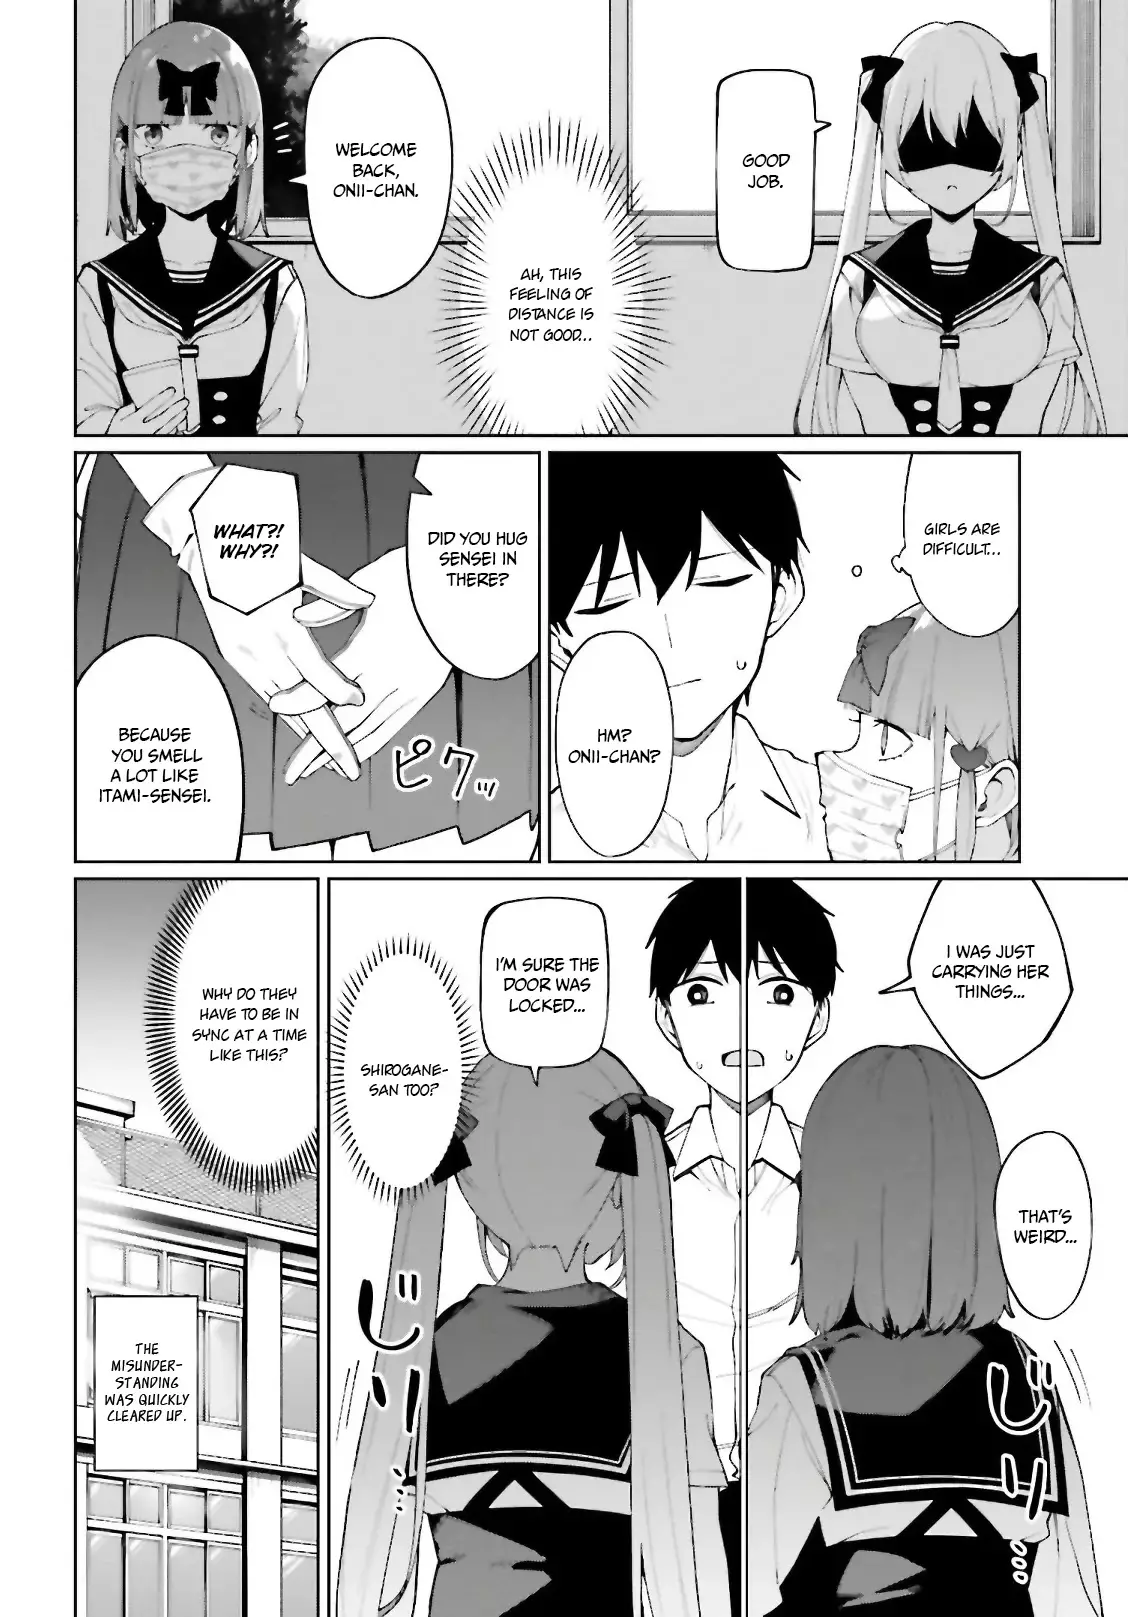 I Don't Understand Shirogane-San's Facial Expression At All - 7 page 23-742154df